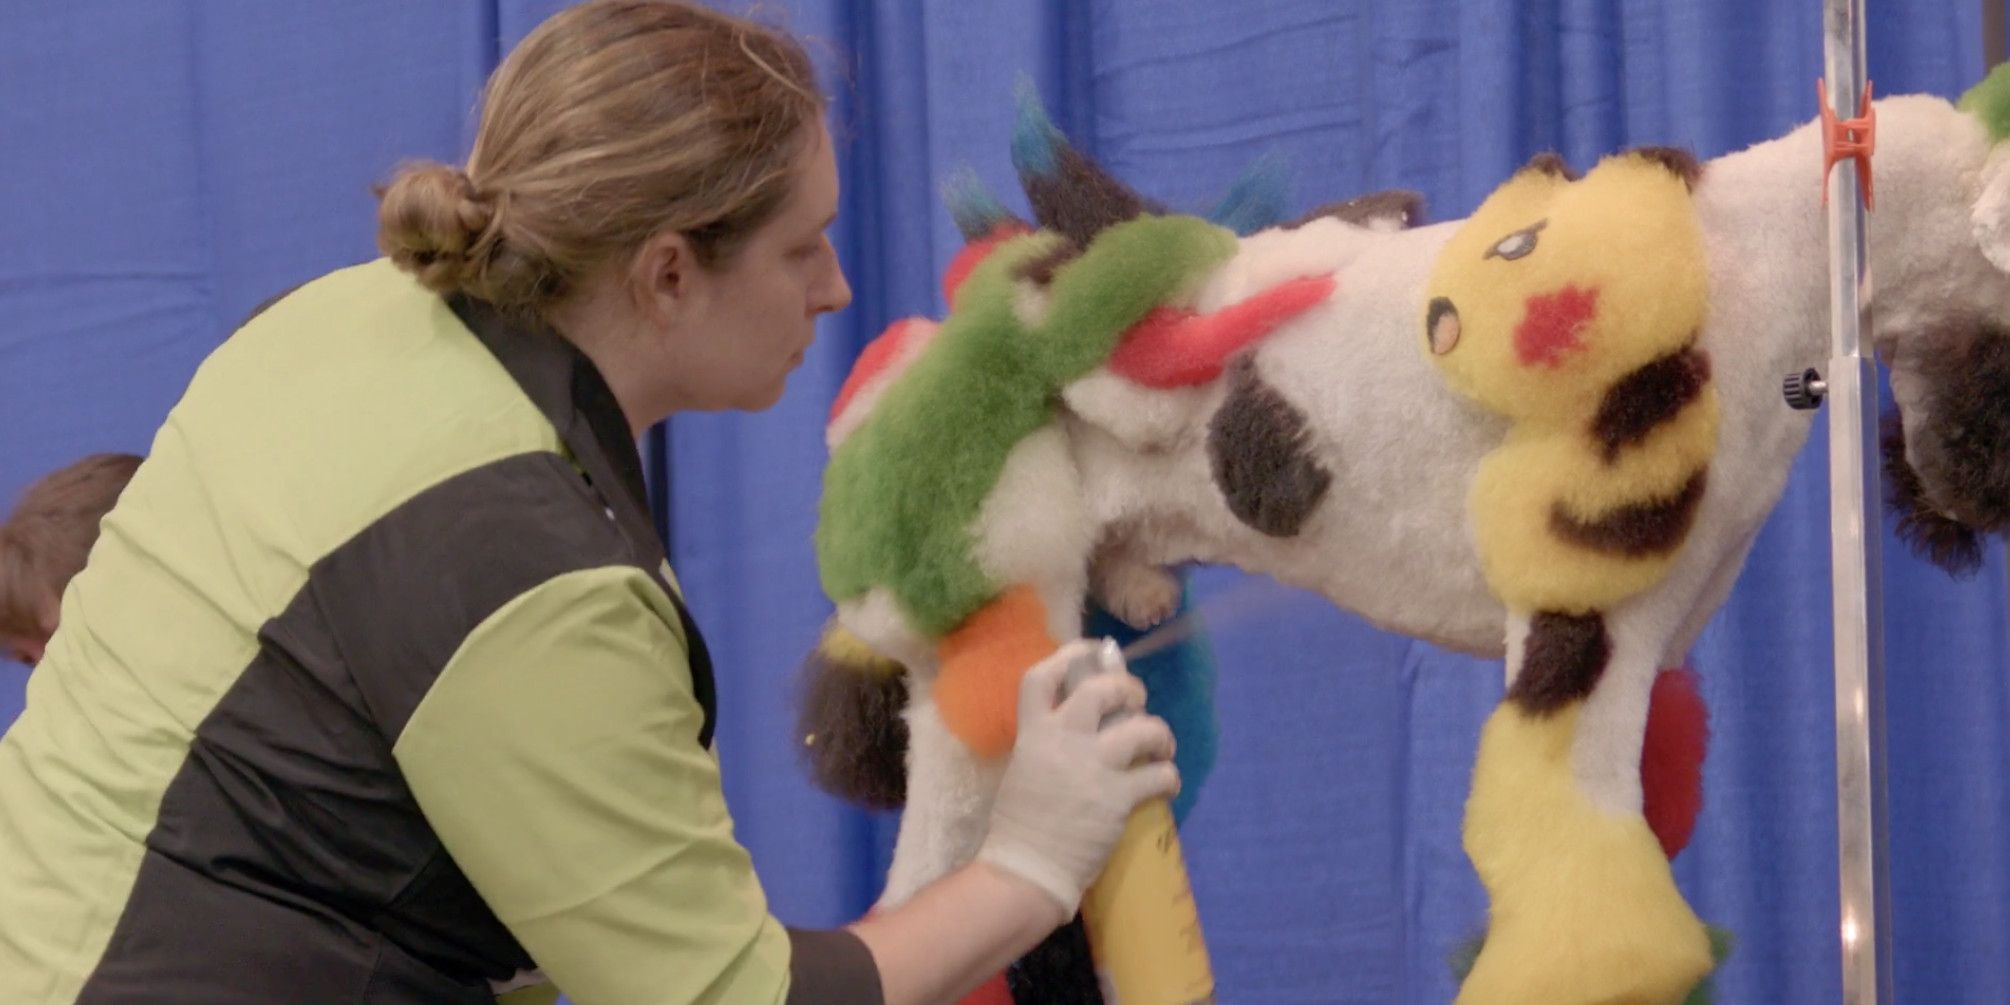 Contestant paints poodle in documentary "Well-Groomed"